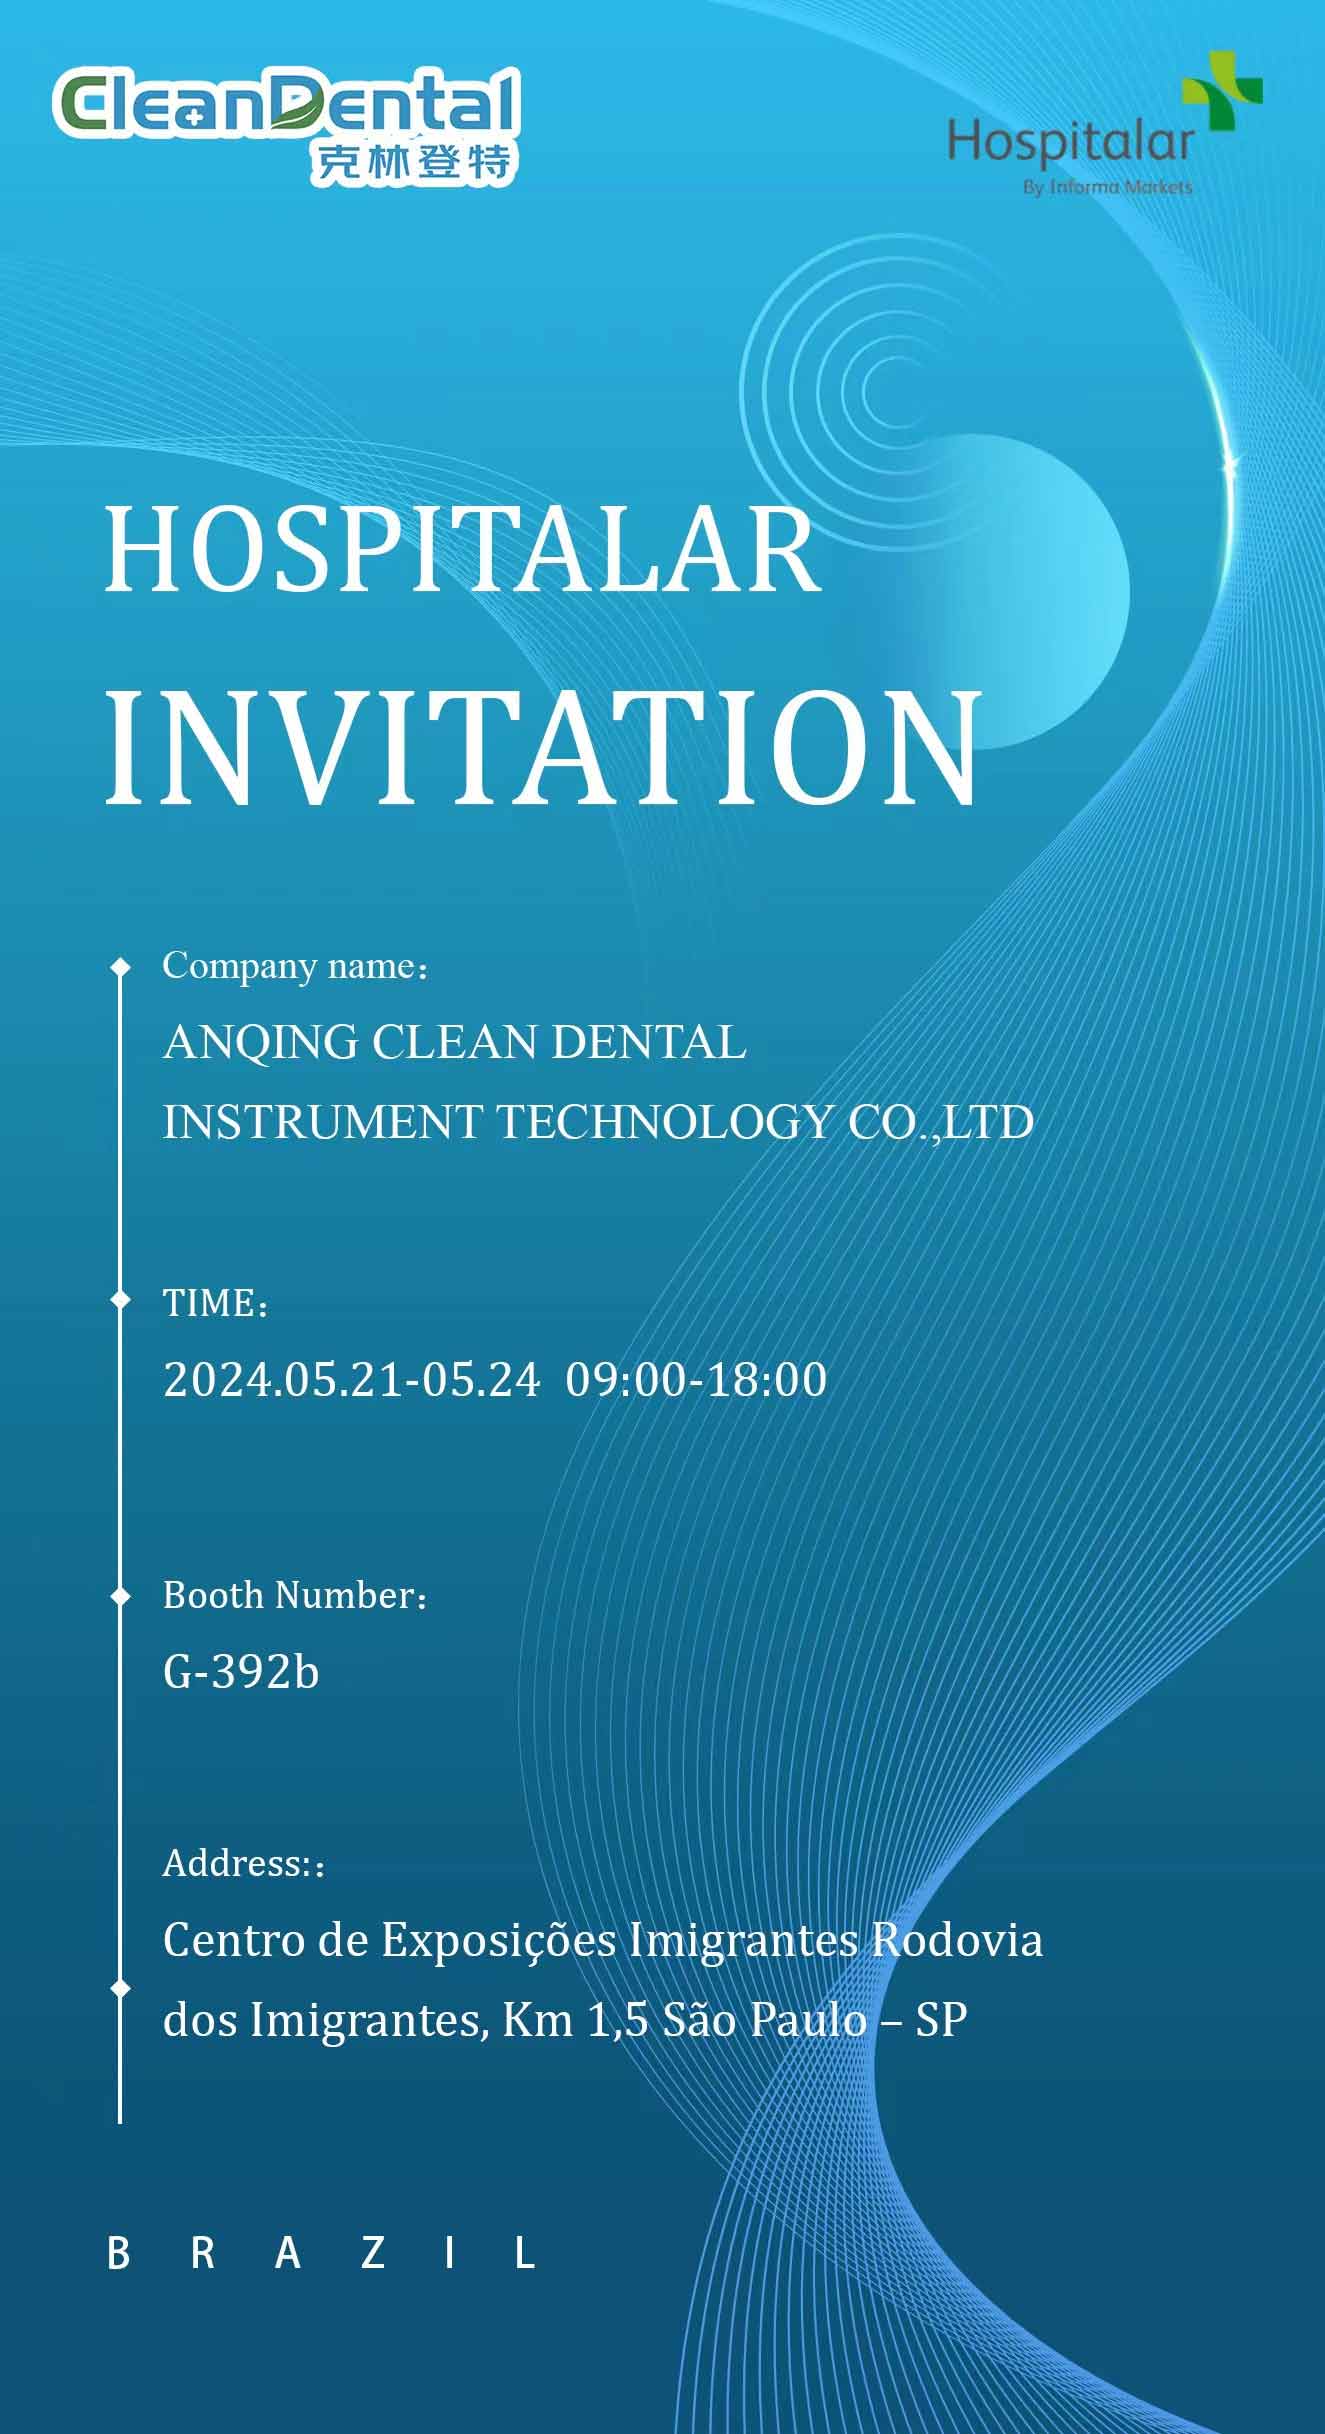 How Did Clean Dental Showcase Their Sterilization Pouches, Medical Cotton Swabs, and Dental Cotton Rolls at Hospitalar?